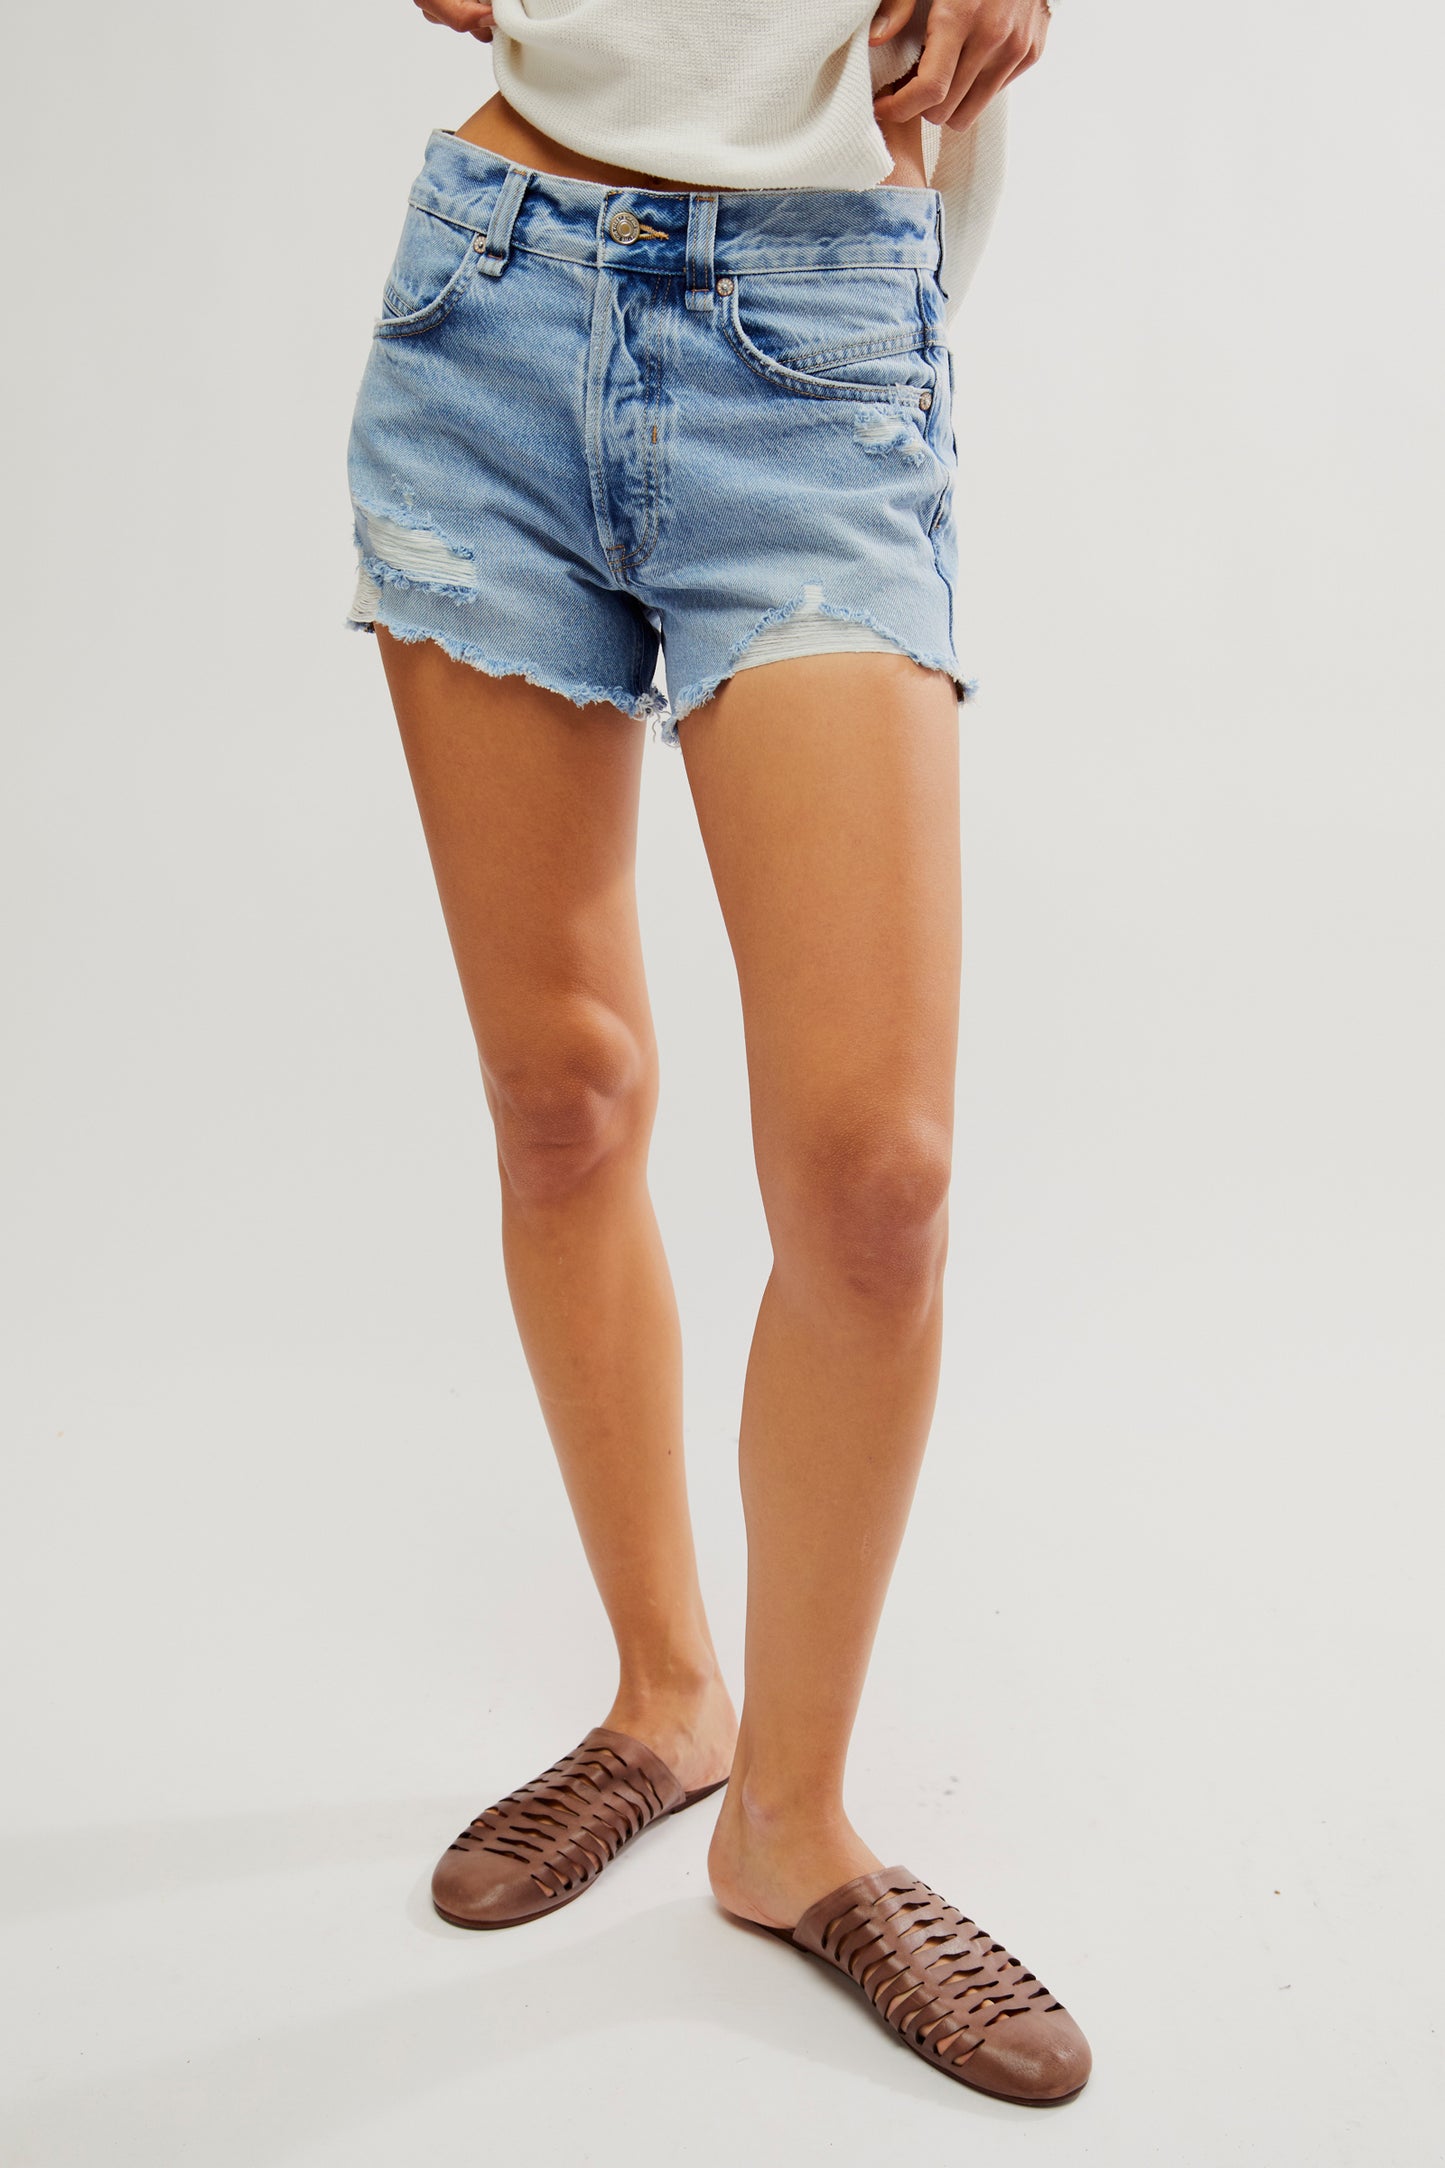 Now or Never Denim Shorts